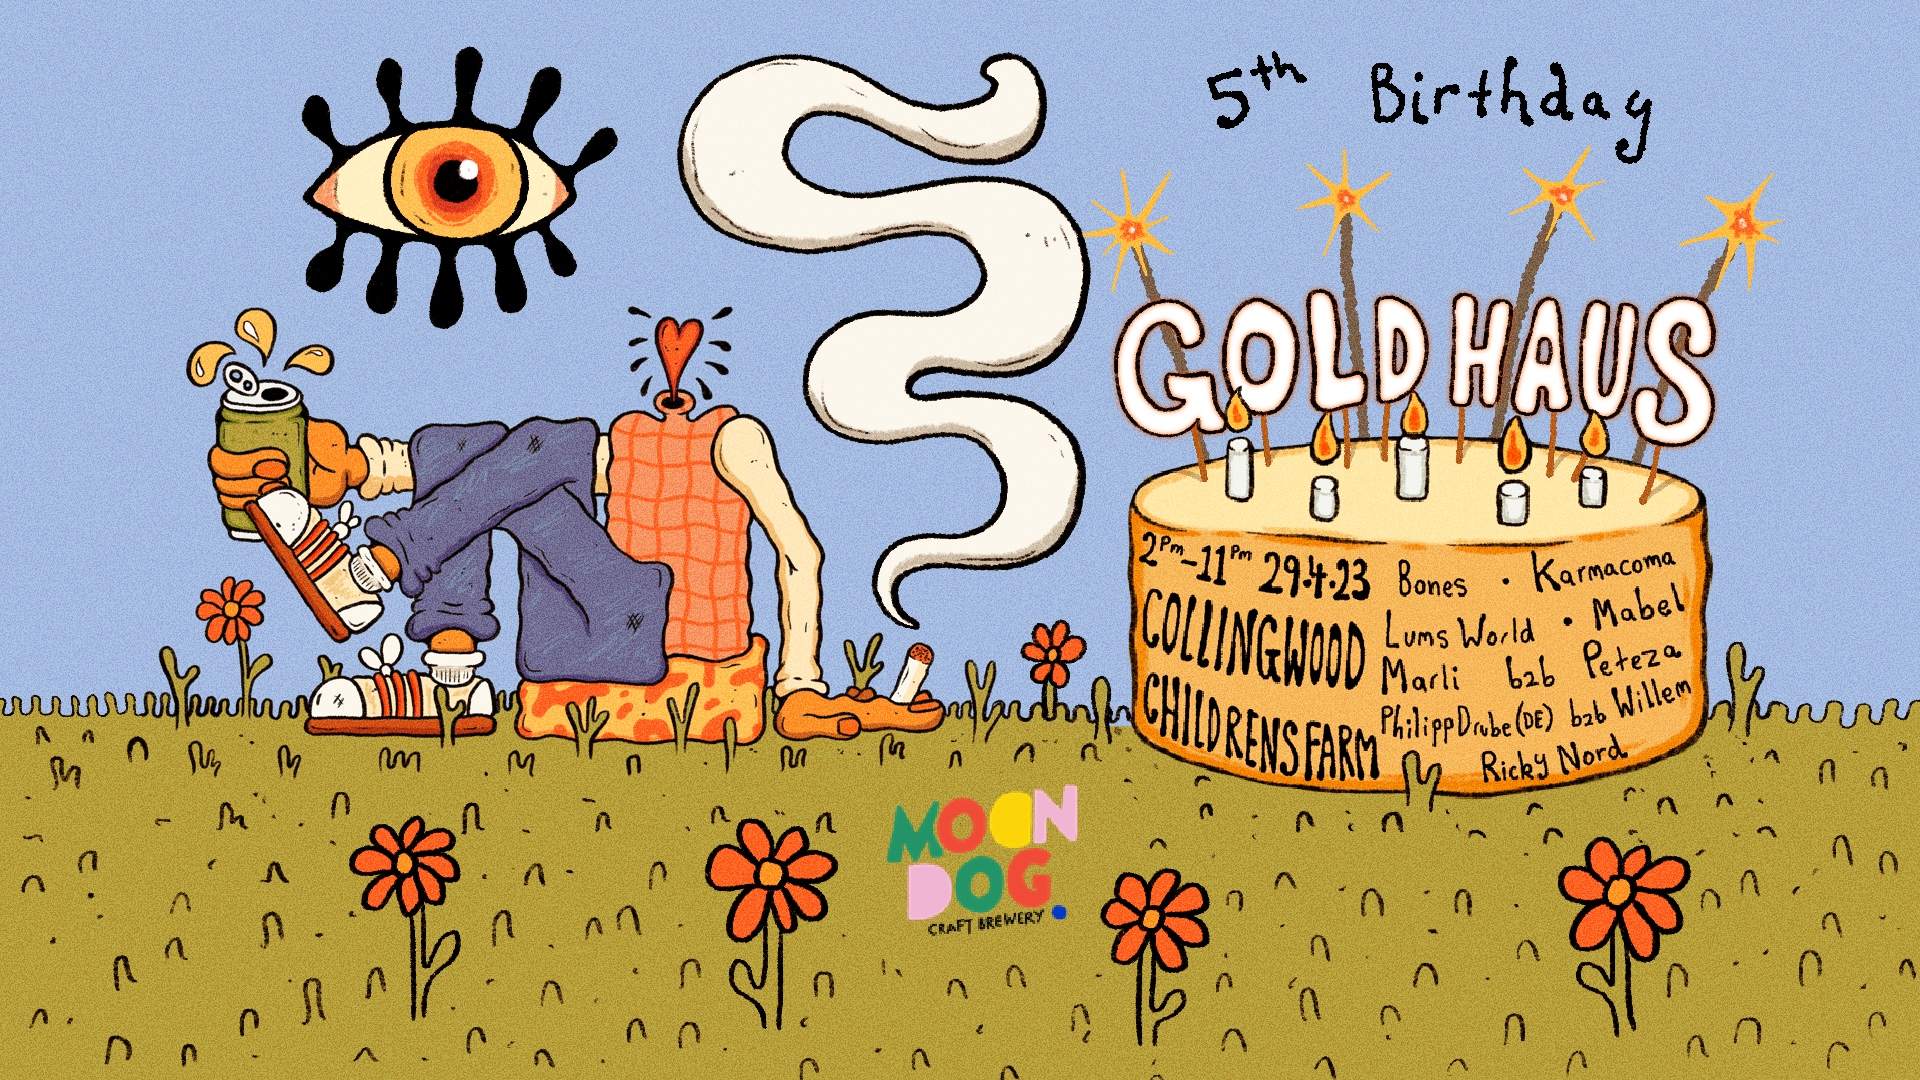 Gold Haus 5th Birthday Day Party | Collingwood Children’s Farm - フライヤー表